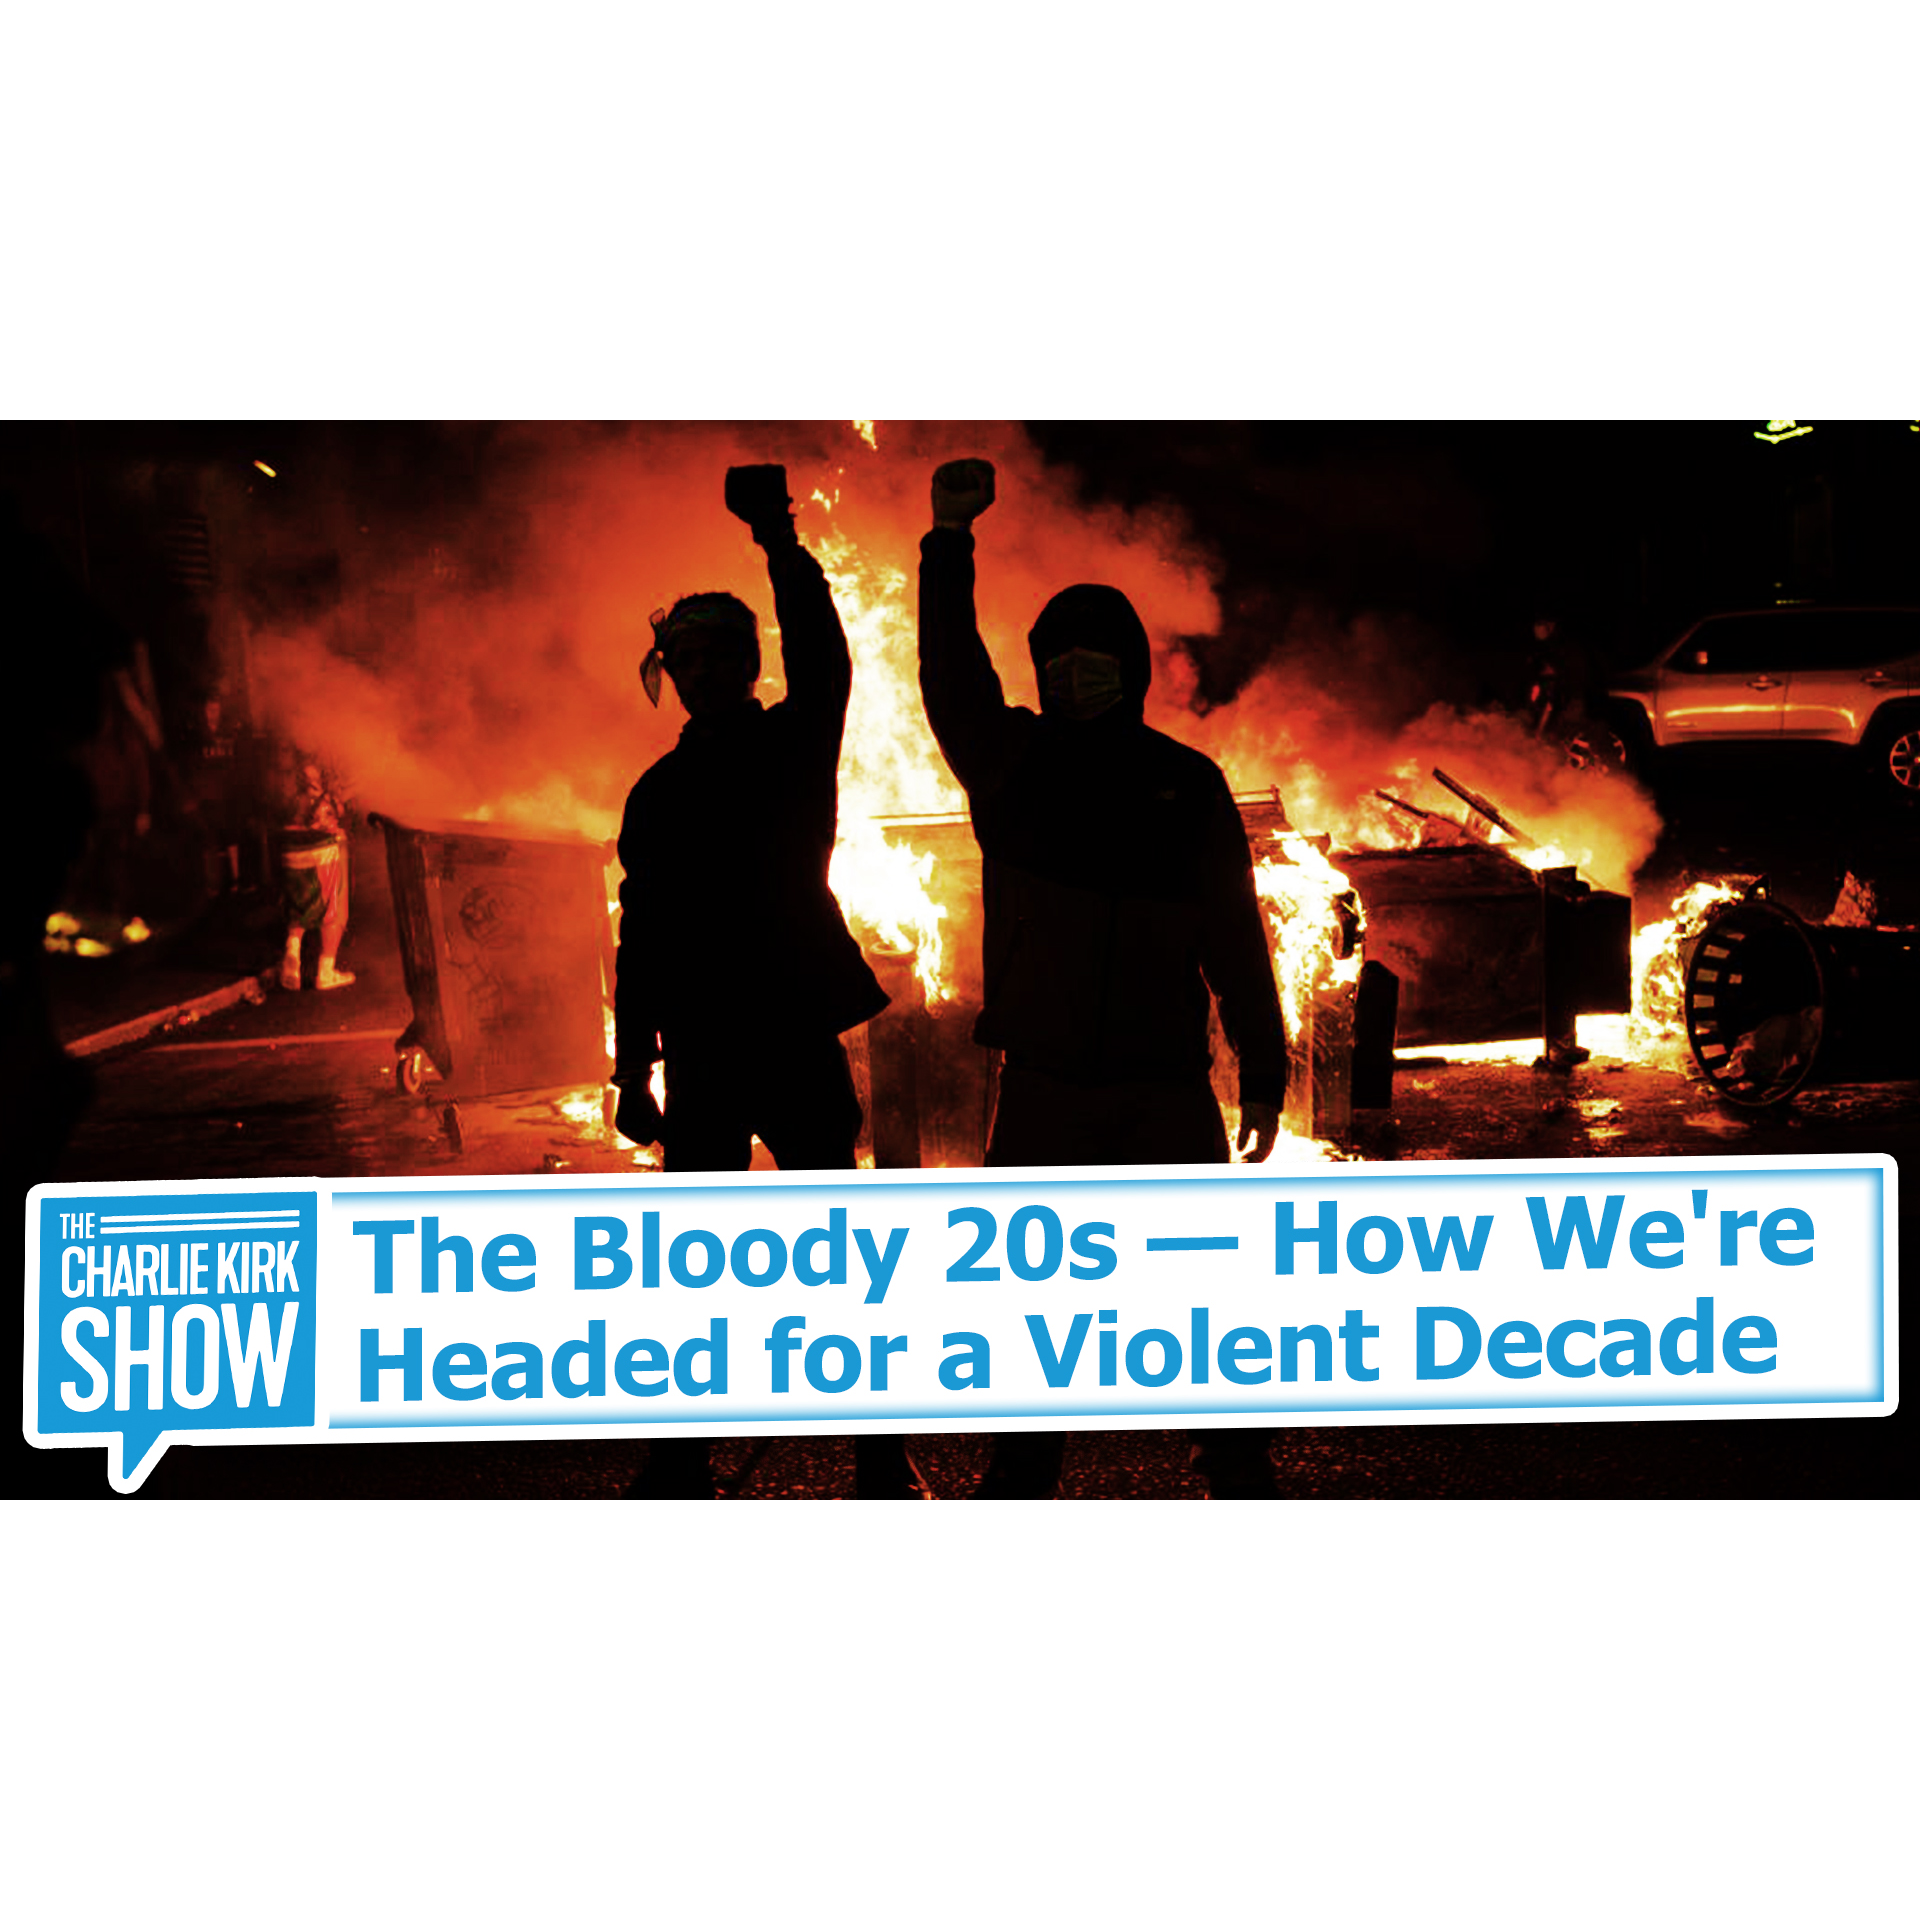 The Bloody 20s — How We're Headed for a Violent Decade